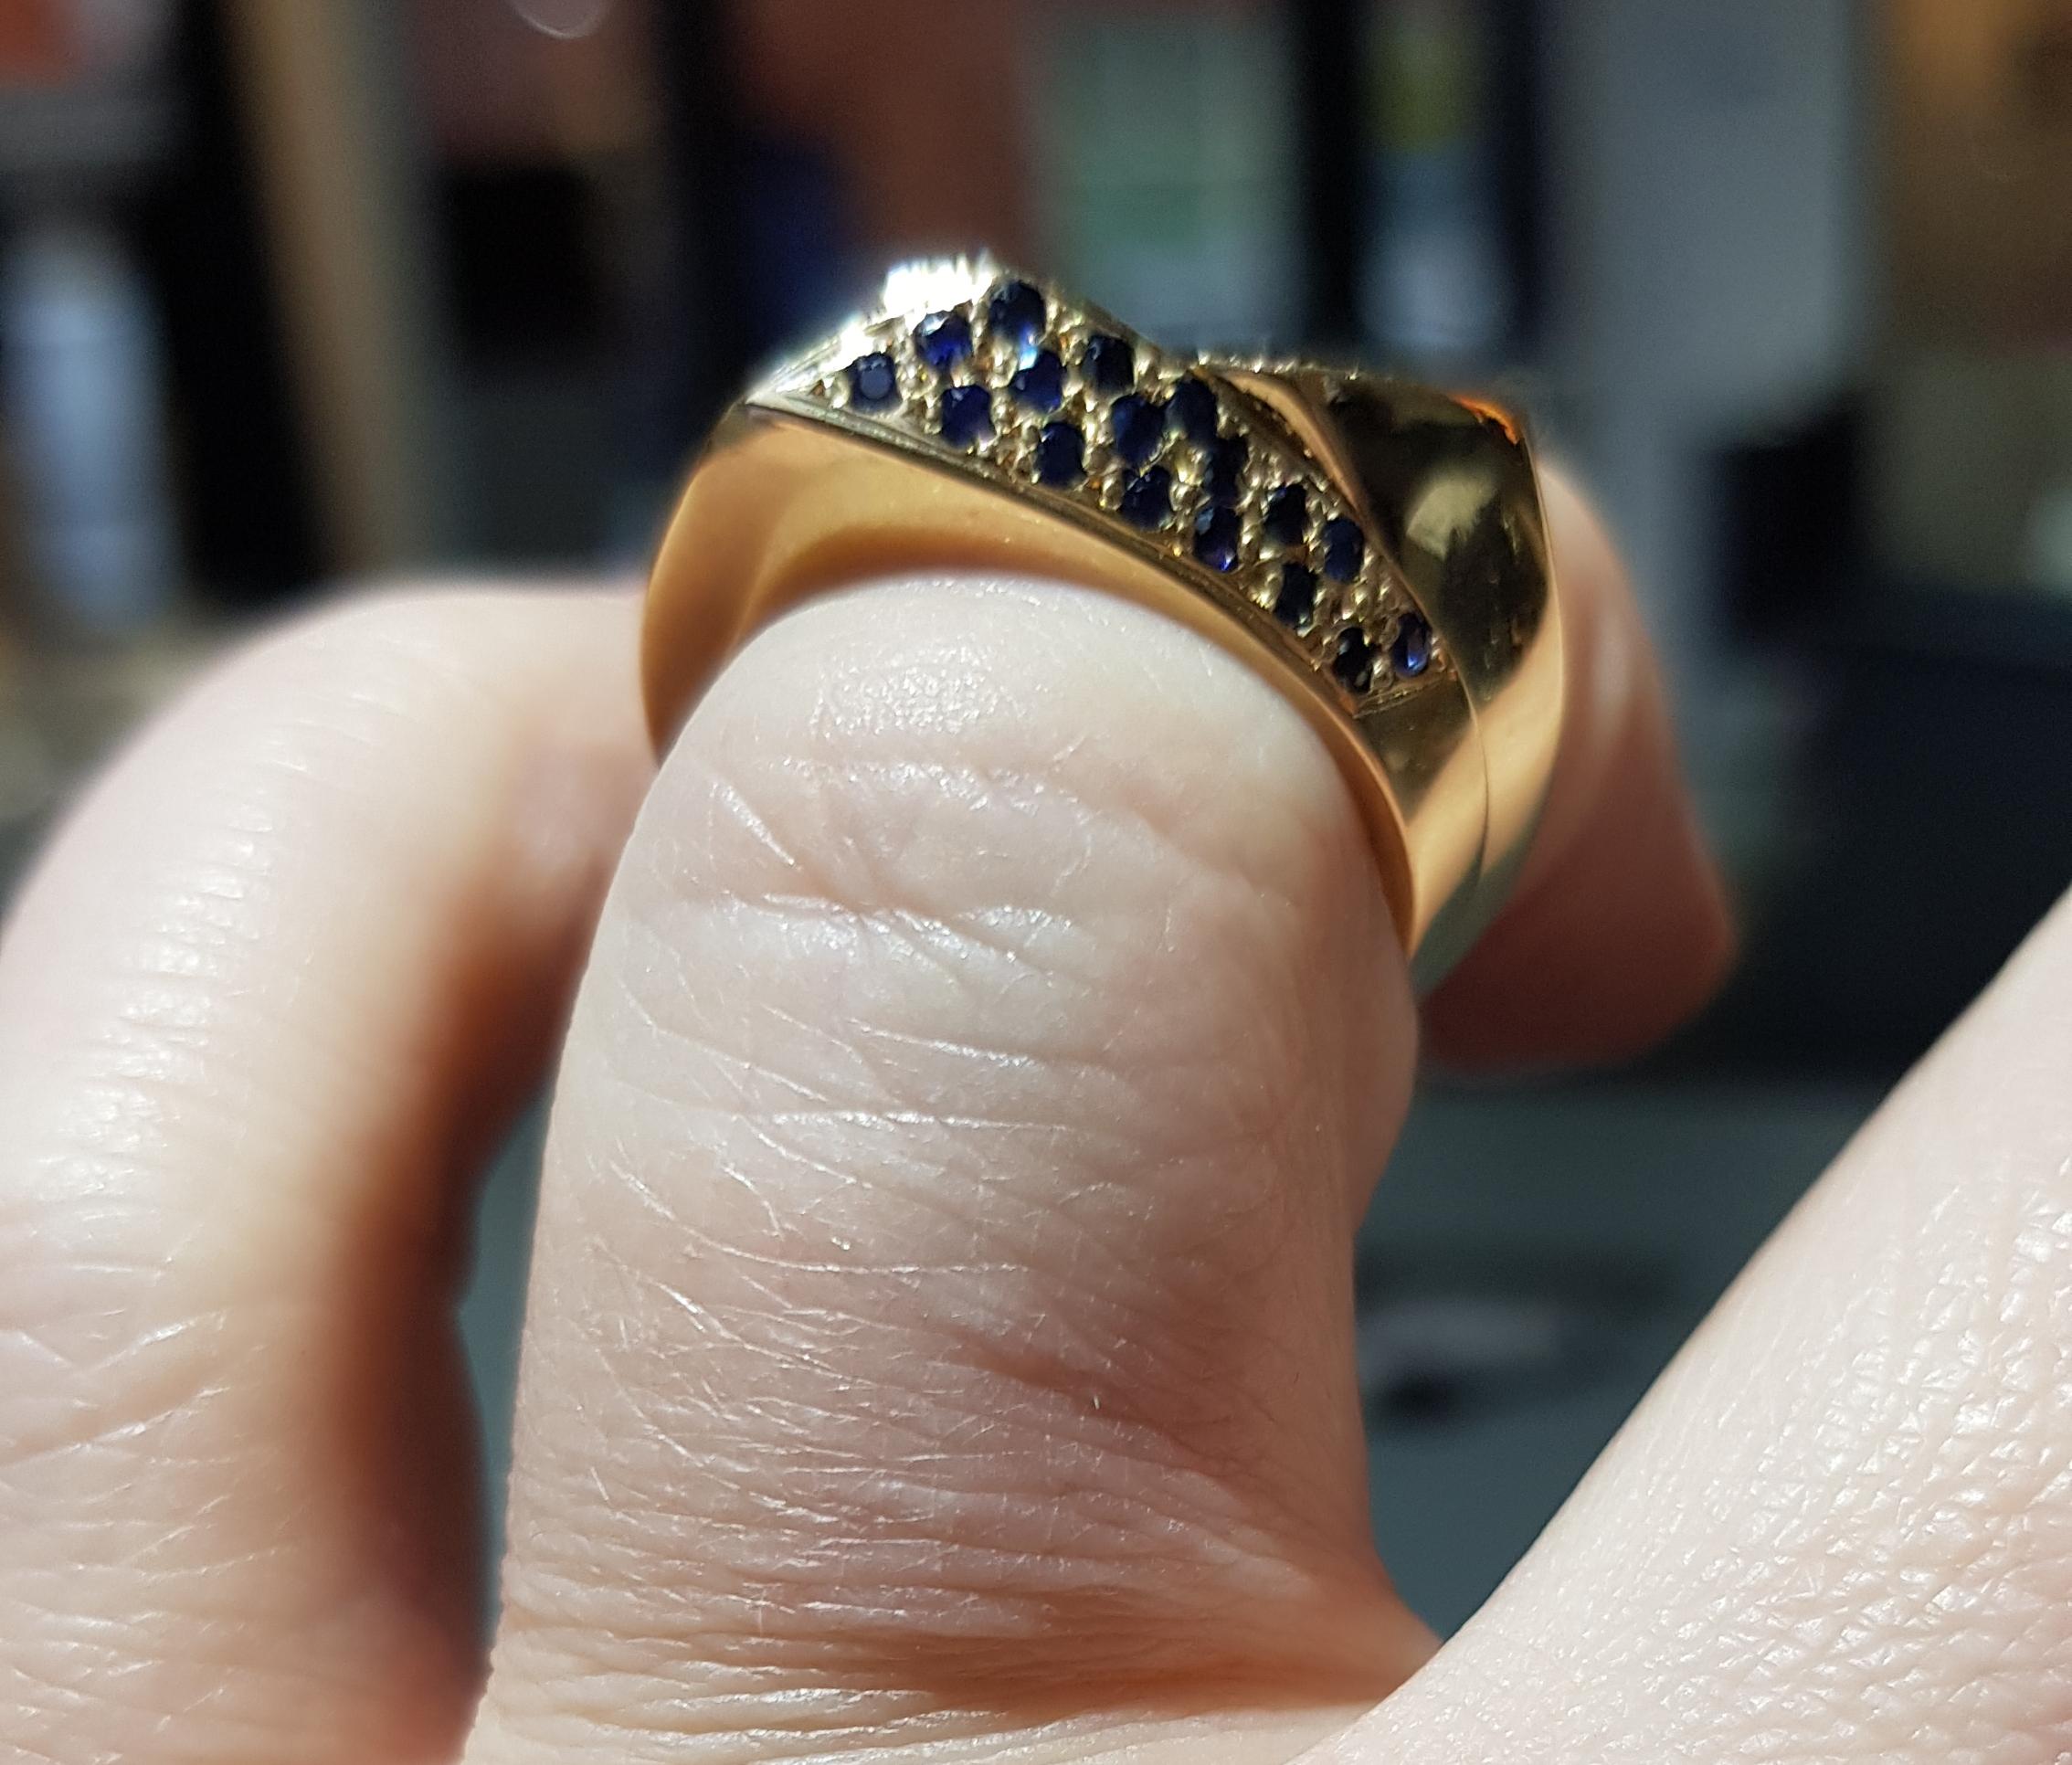 Hand carved gold ring available in different options

this ring is not sizeable

SAPPHIRE ROYAL BLUE 
pictured with a ruby version can be stacked together

ring size o

AVAILABLE